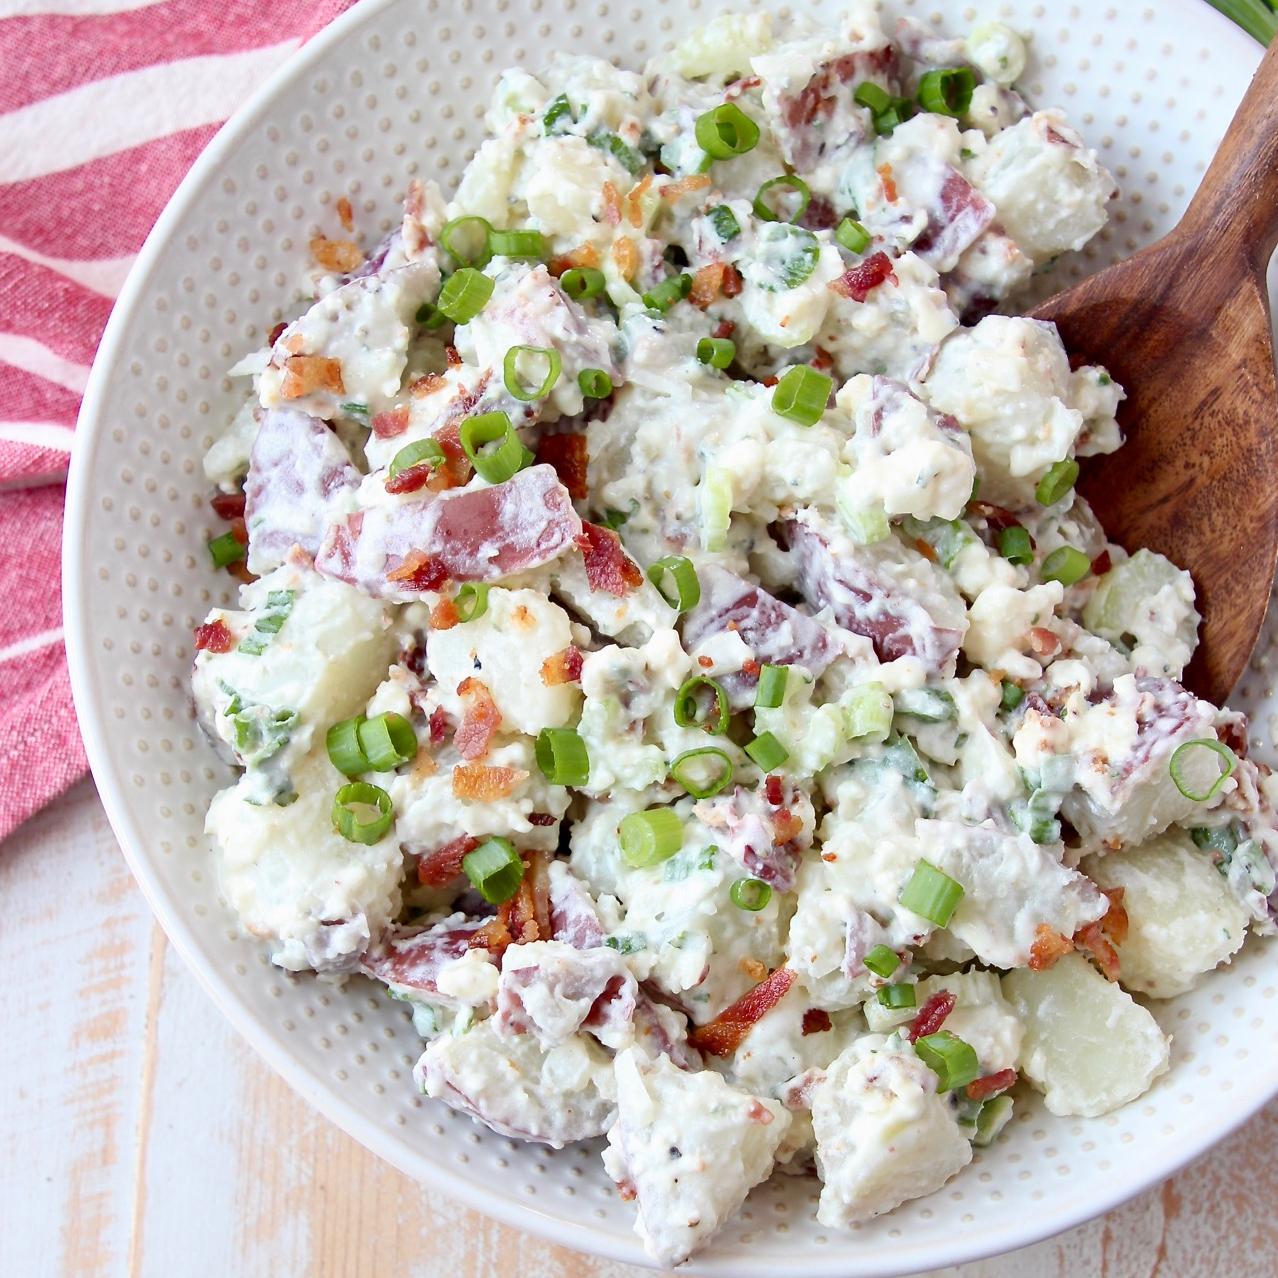  Who says potato salad has to be boring? This one is anything but!